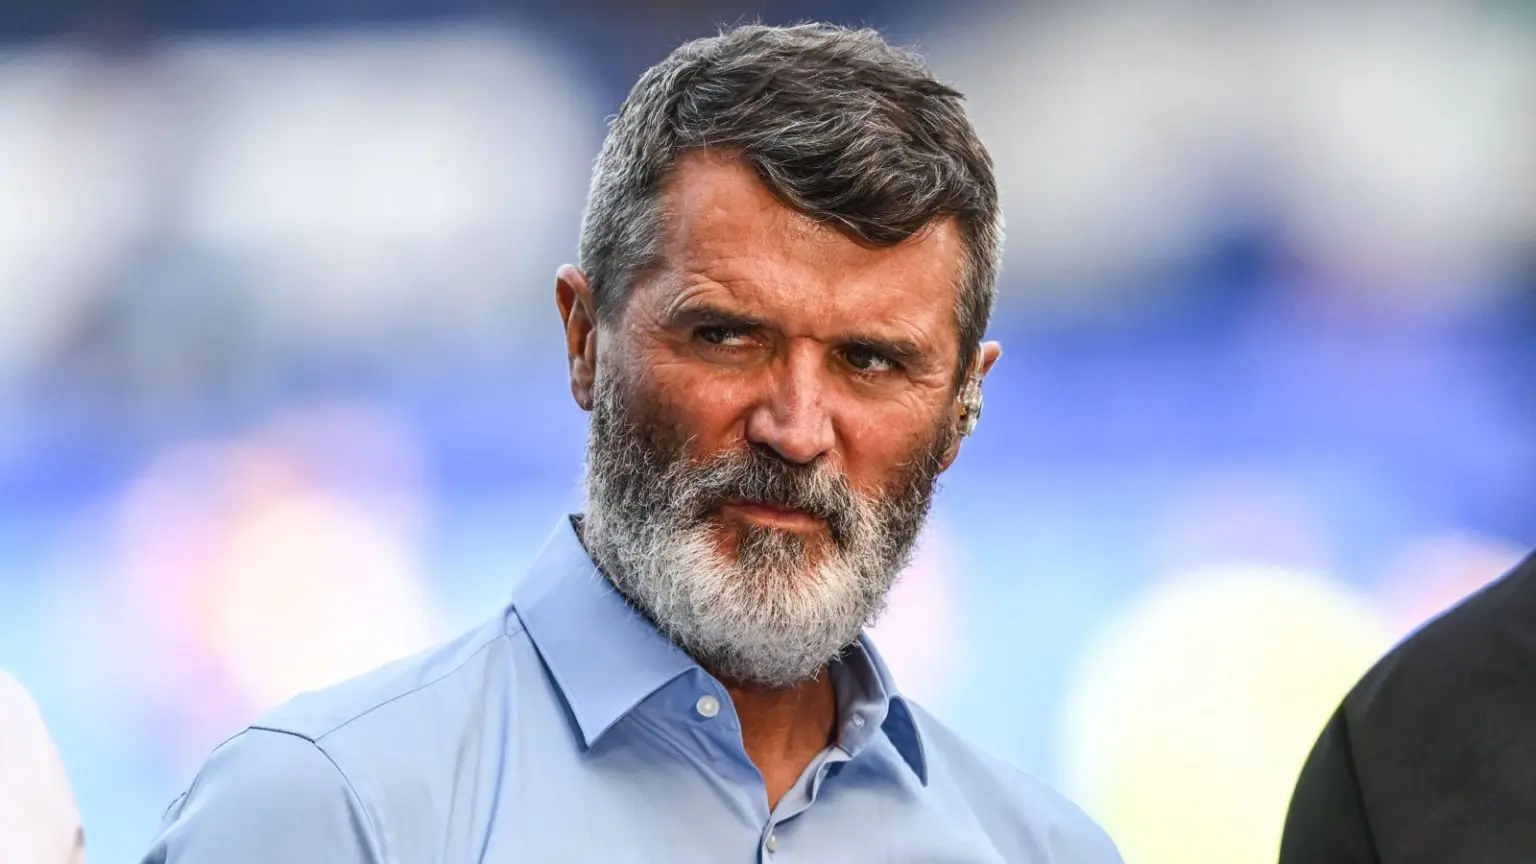 Manchester United legend Roy Keane has criticised Erling Haaland’s general play. Haaland failed to score as Manchester City